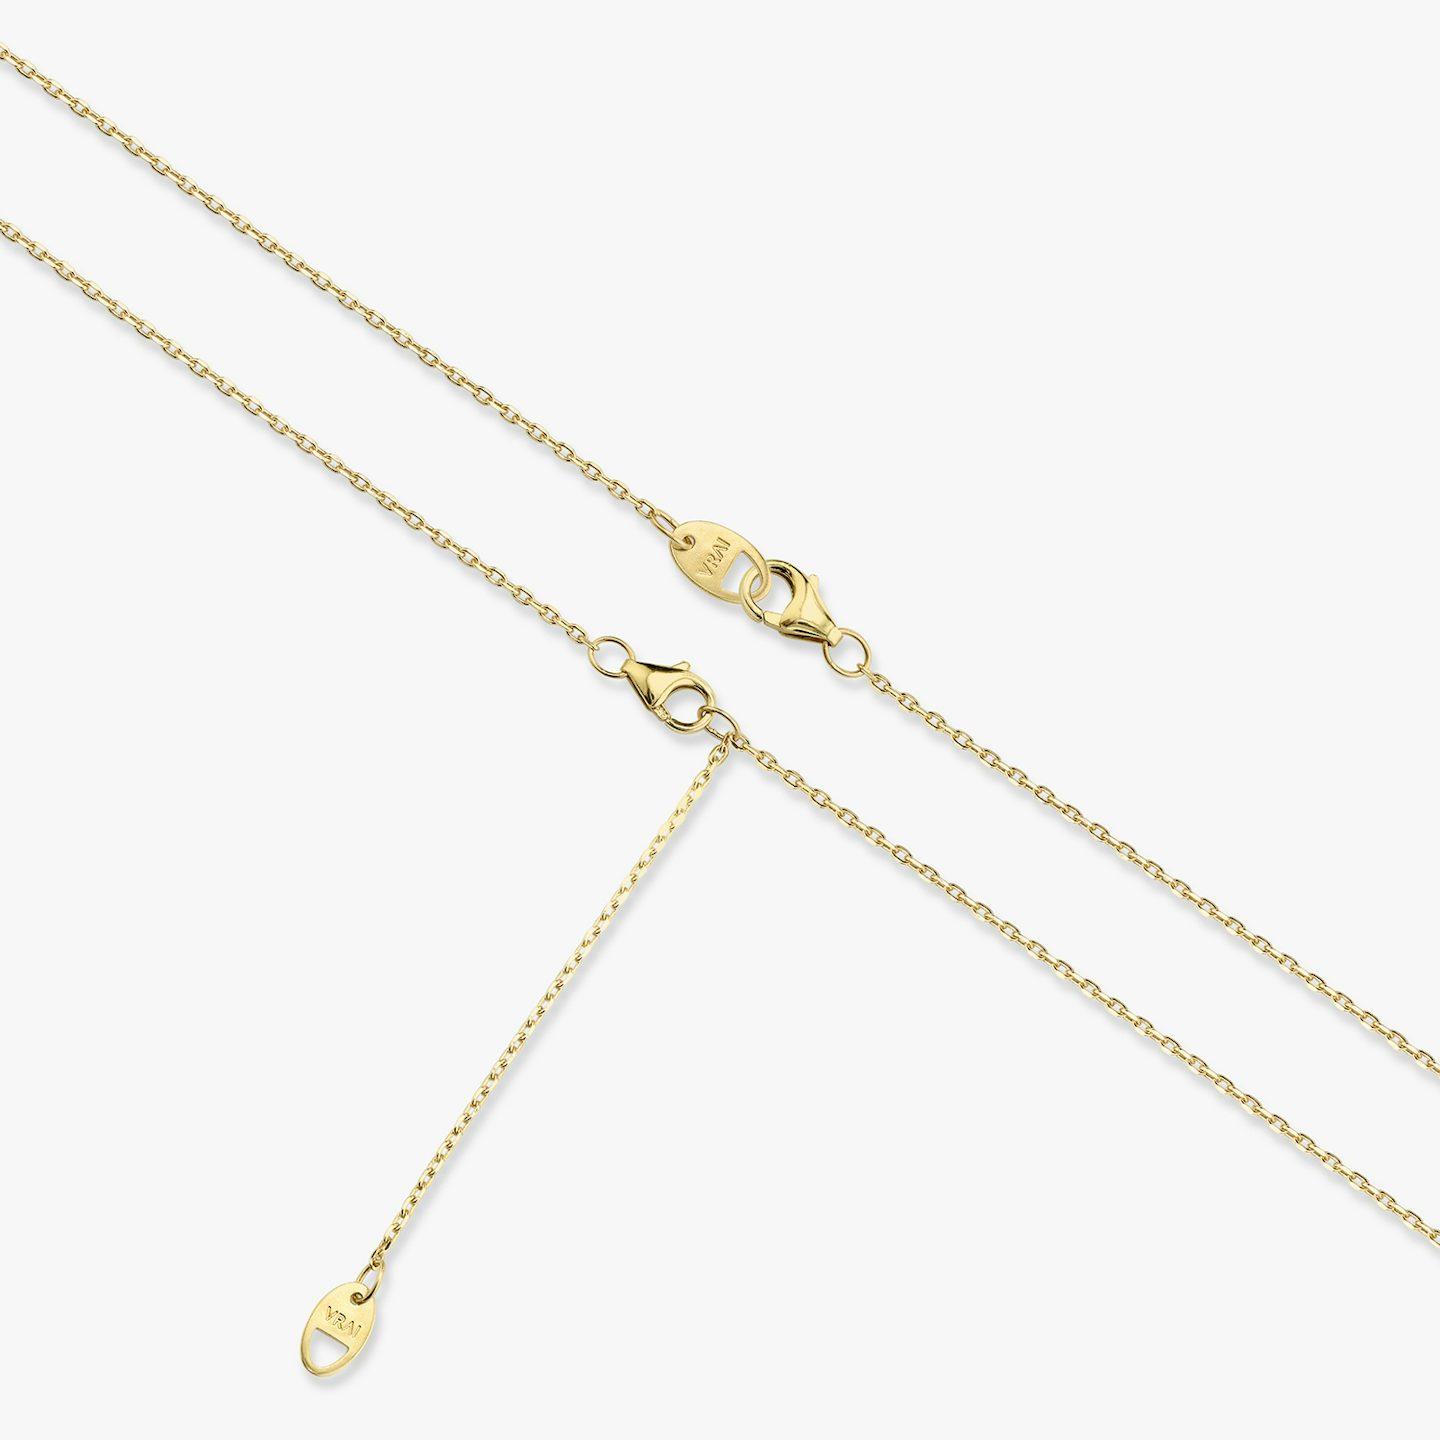 Signature Pear Drop Halo Necklace | Round Brilliant | 14k | 18k Yellow Gold | Chain length: 16-18